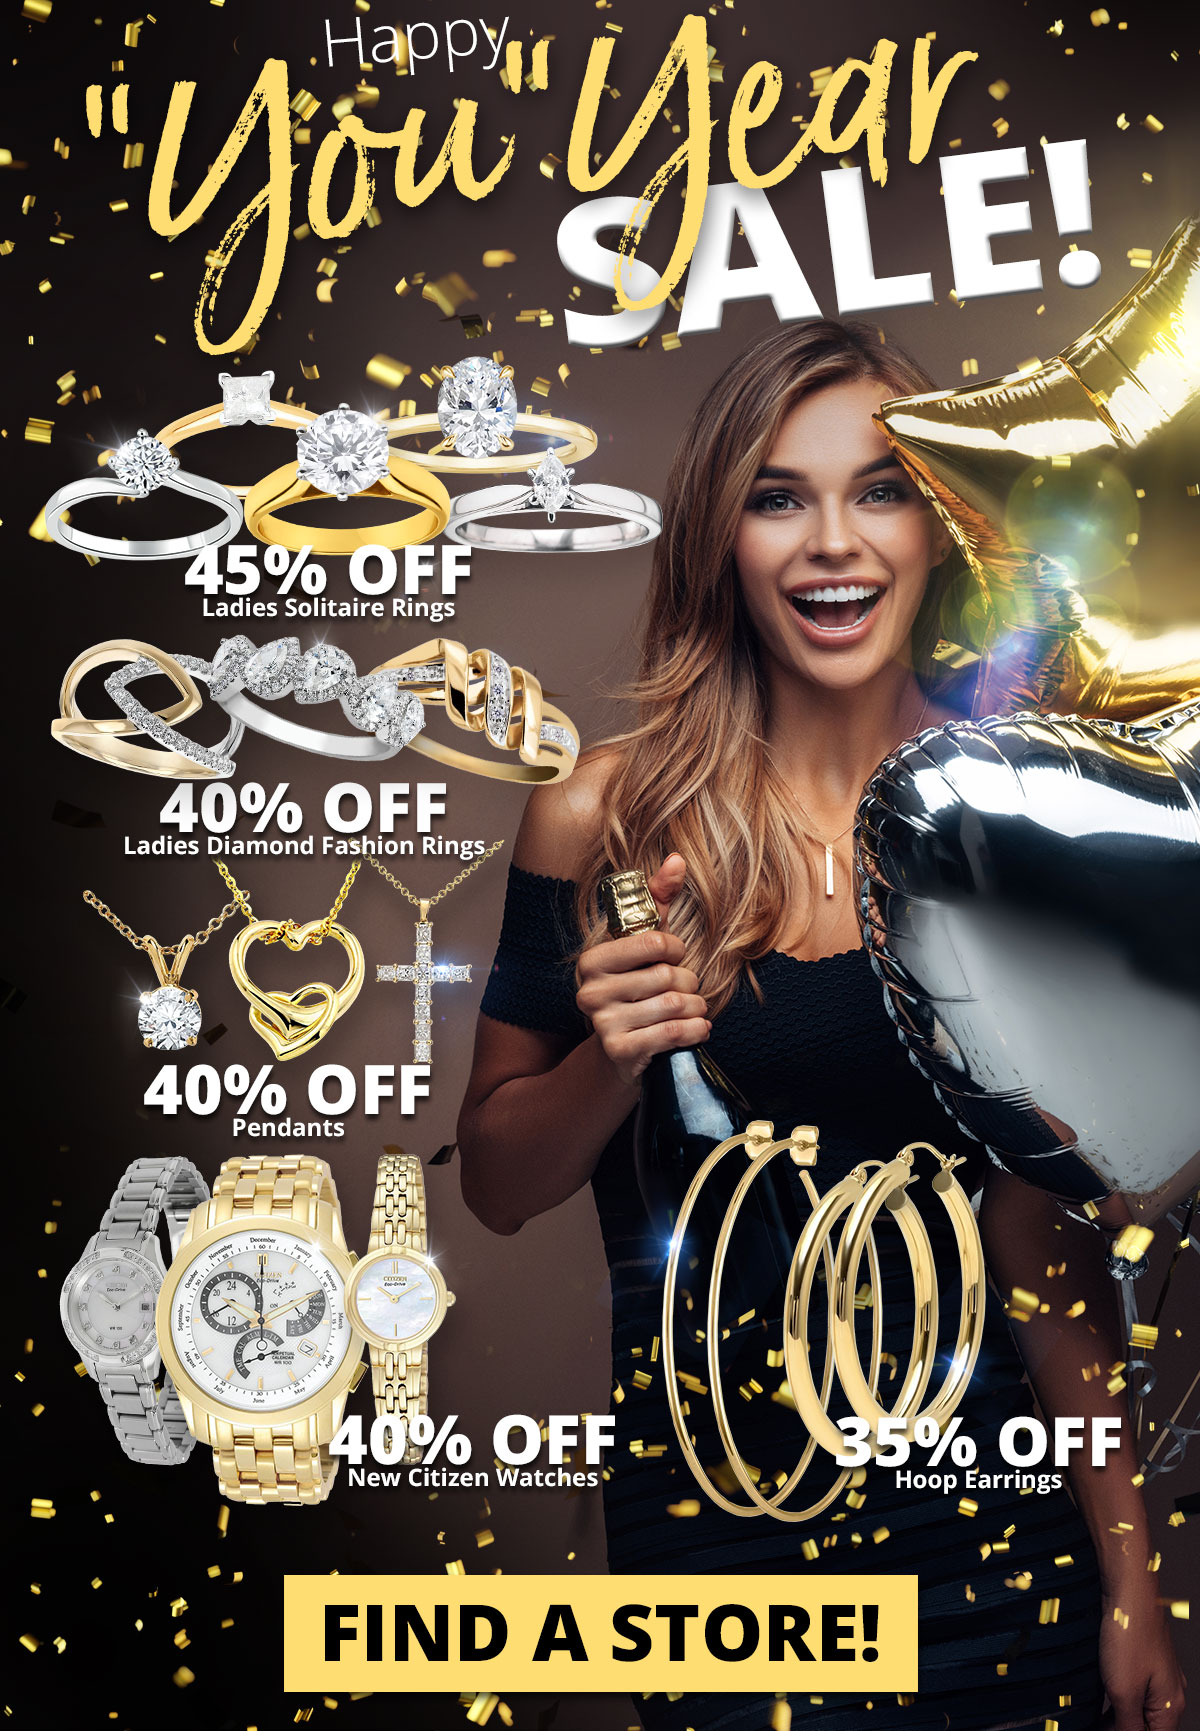 Happy "You" Year Sale! 45% OFF Ladies Solitaire Rings 40% OFF Ladies Diamond Fashion Rings 40% OFF Pendants 40% OFF New Citizen Watches 35% OFF Hoop Earrings